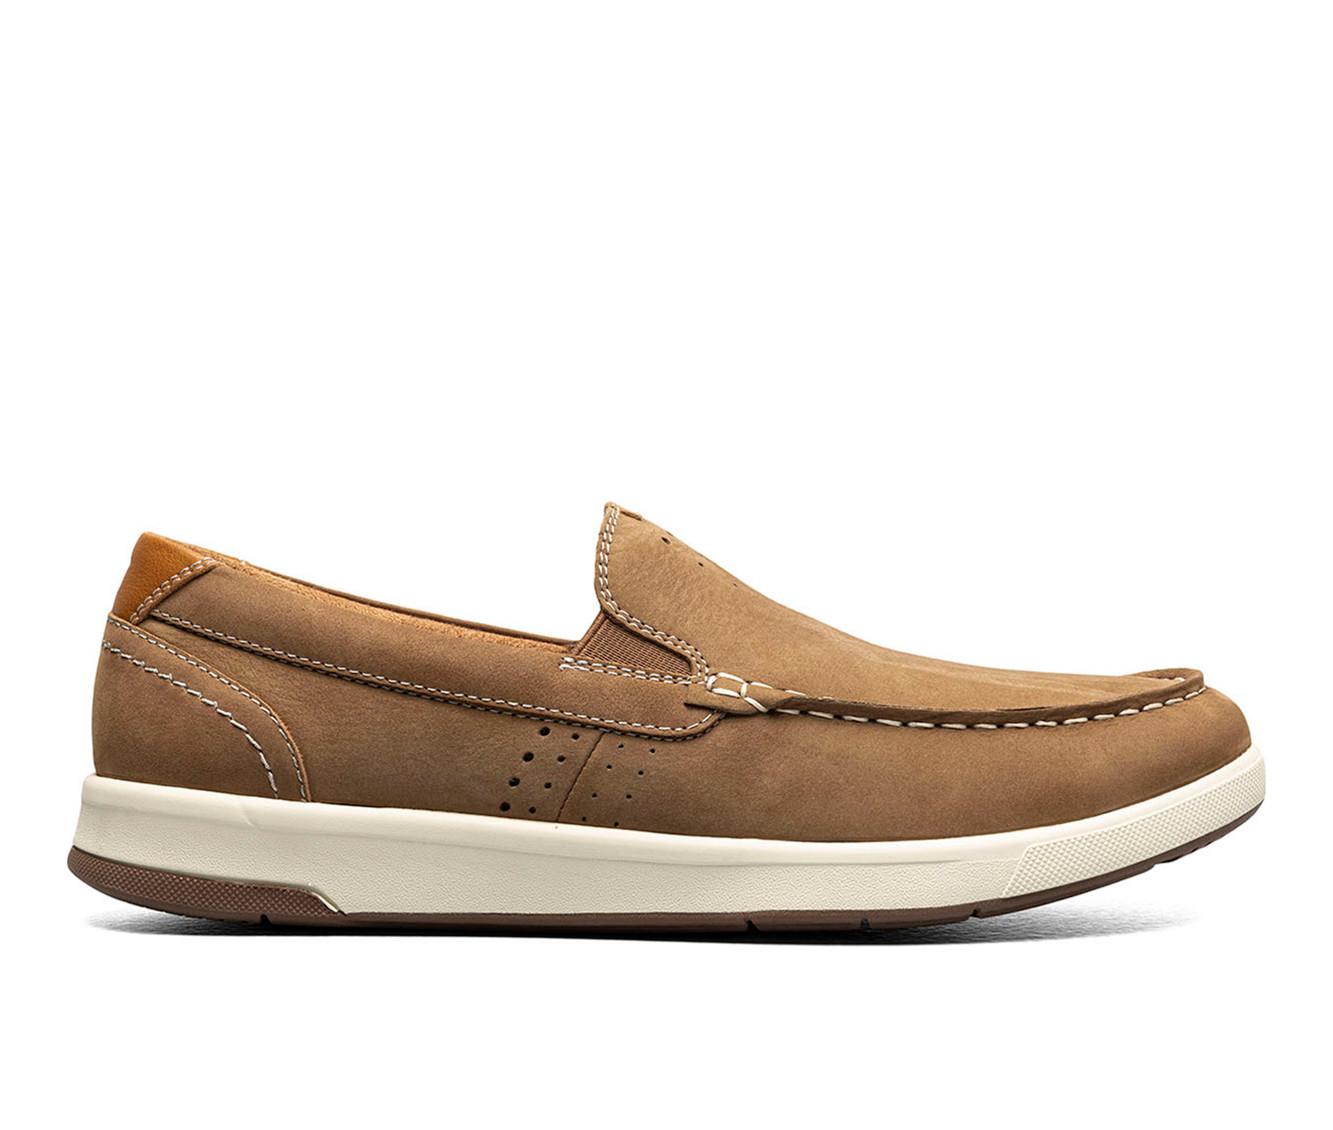 Men's Florsheim Crossover Moc Toe Slip On Casual Loafers